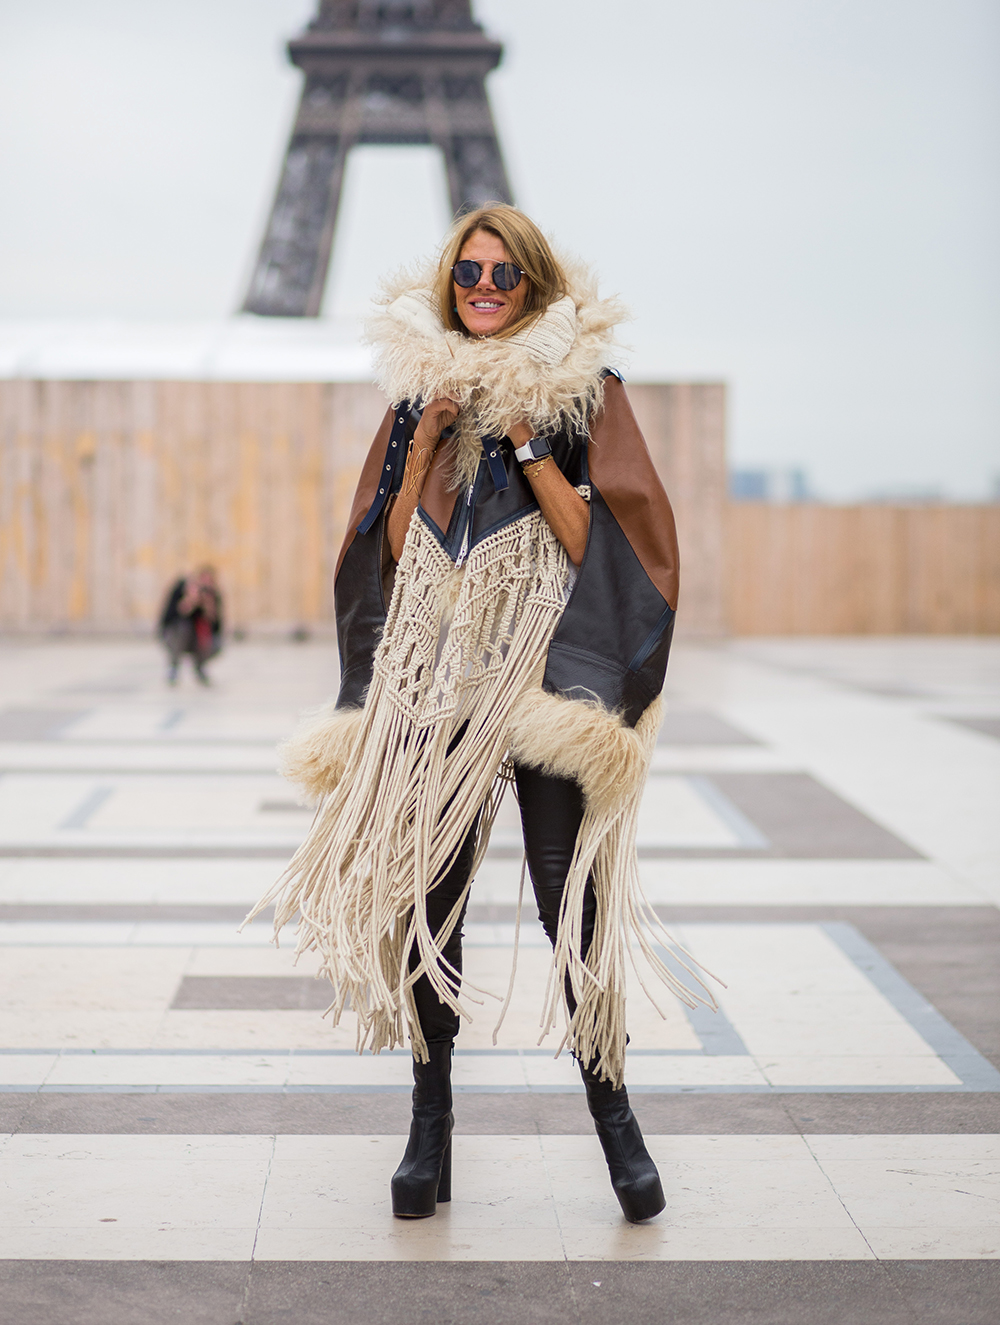 Anna Dello Russo at Paris Fashion Week. Photo / Getty Images